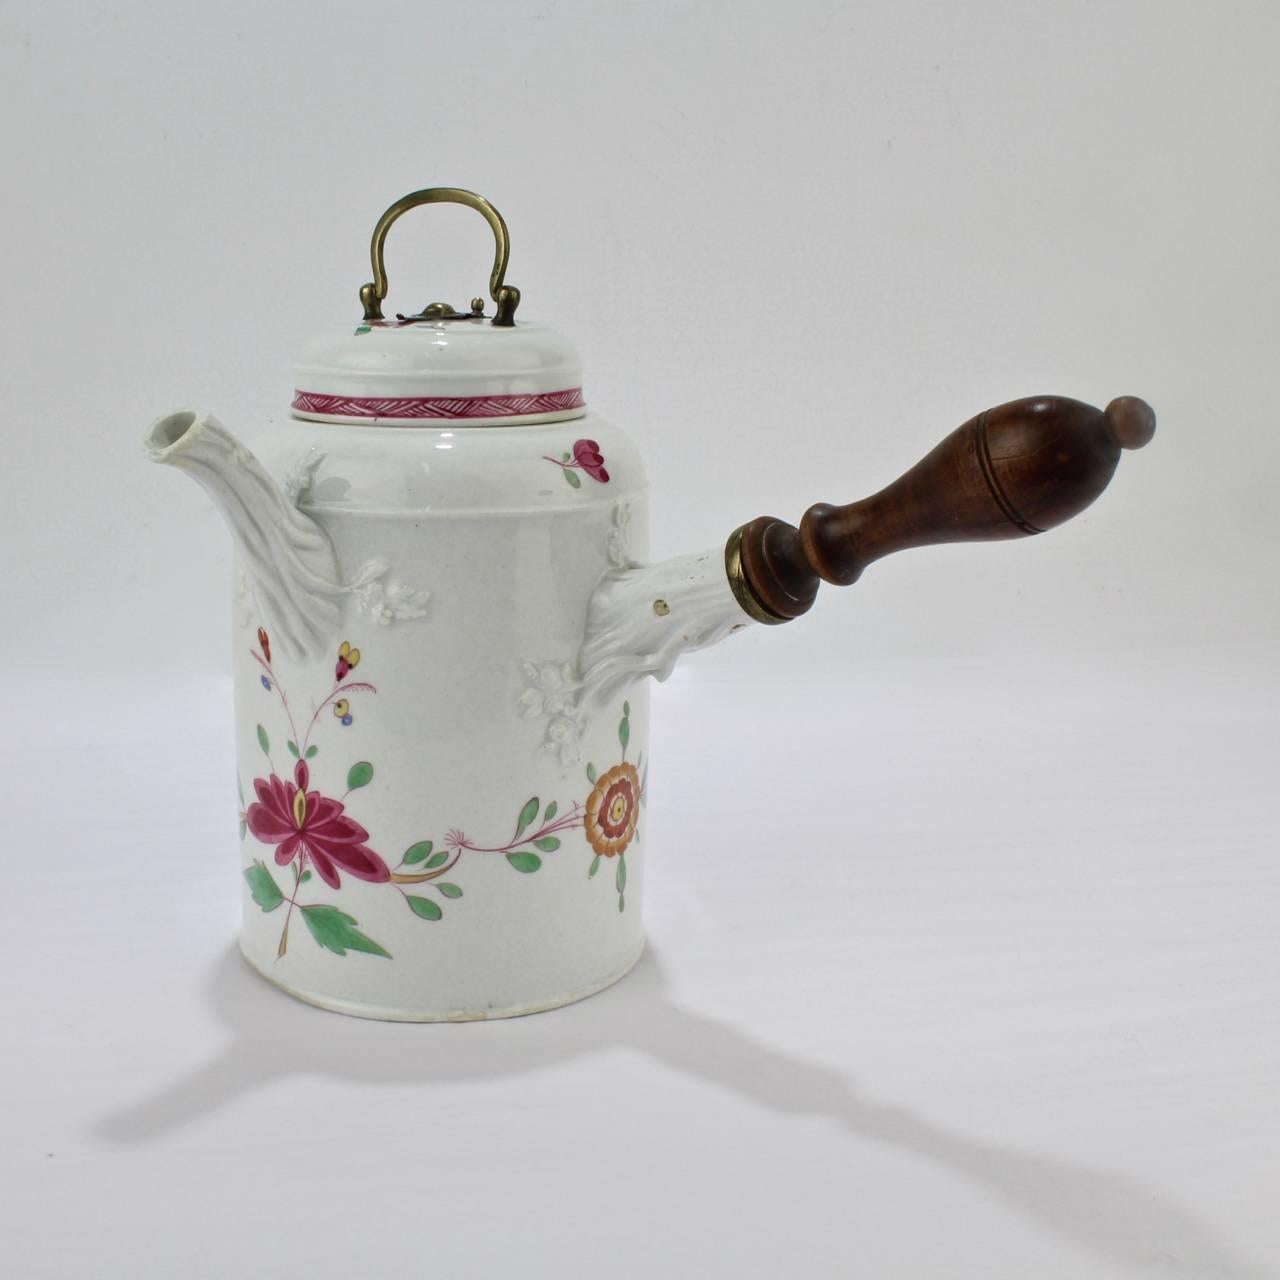 A good marcolini period Meissen Porcelain chocolate pot.

This rare chocolate pot is decorated in an Indian flower variant in purple, green, yellow and blue and retains a period wooden handle. The lid has a brass handle, mount, and spoon hole